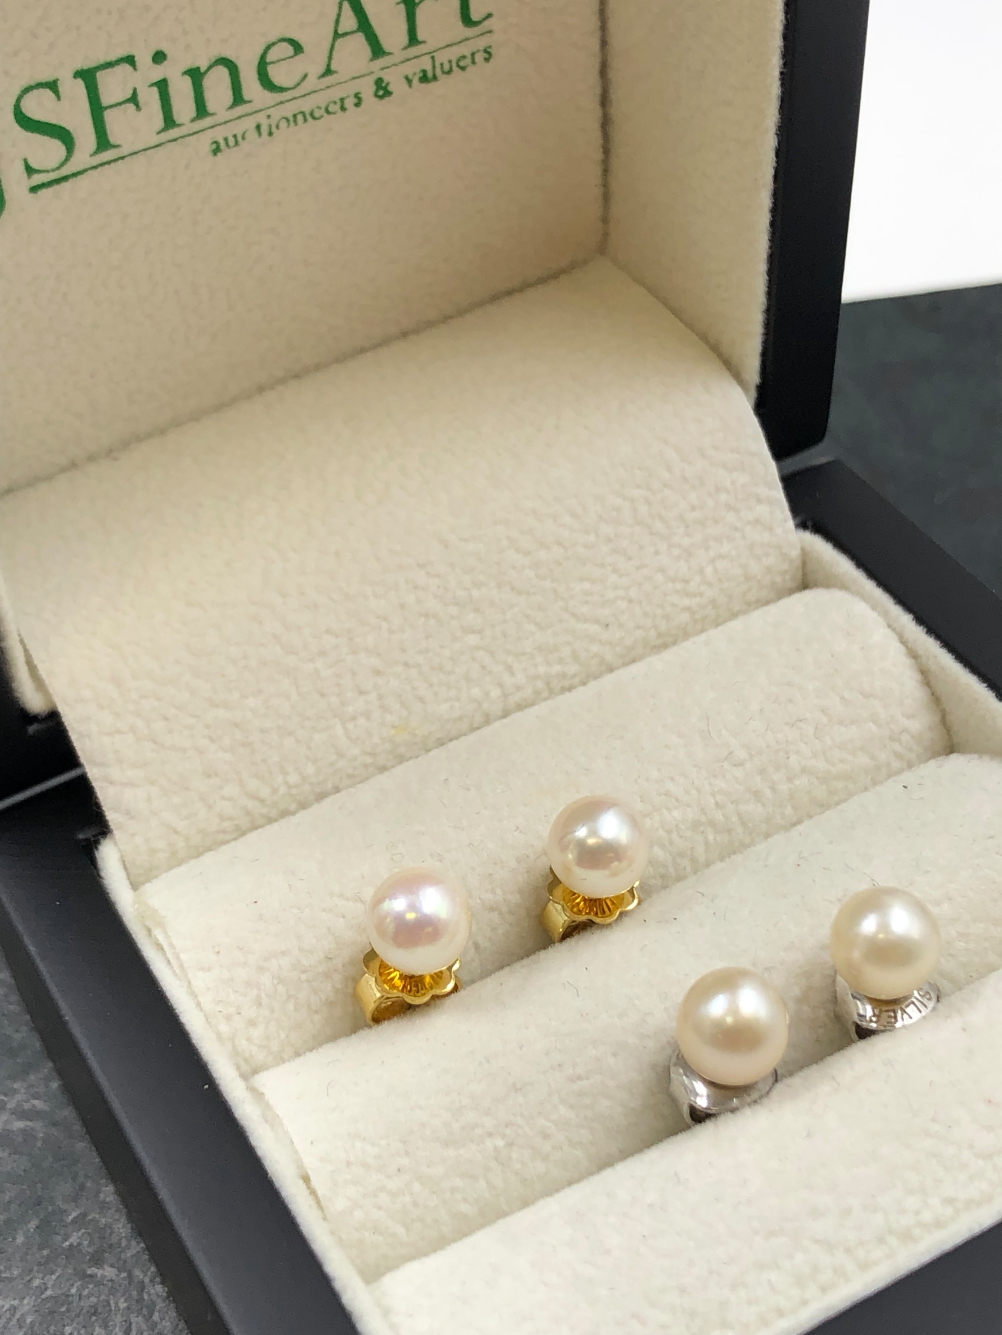 A PAIR OF CULTURED PEARL STUD EARRINGS, SET IN UNHALLMAKRED 18ct GOLD FITTINGS, COMPETE WITH 750 - Image 2 of 2